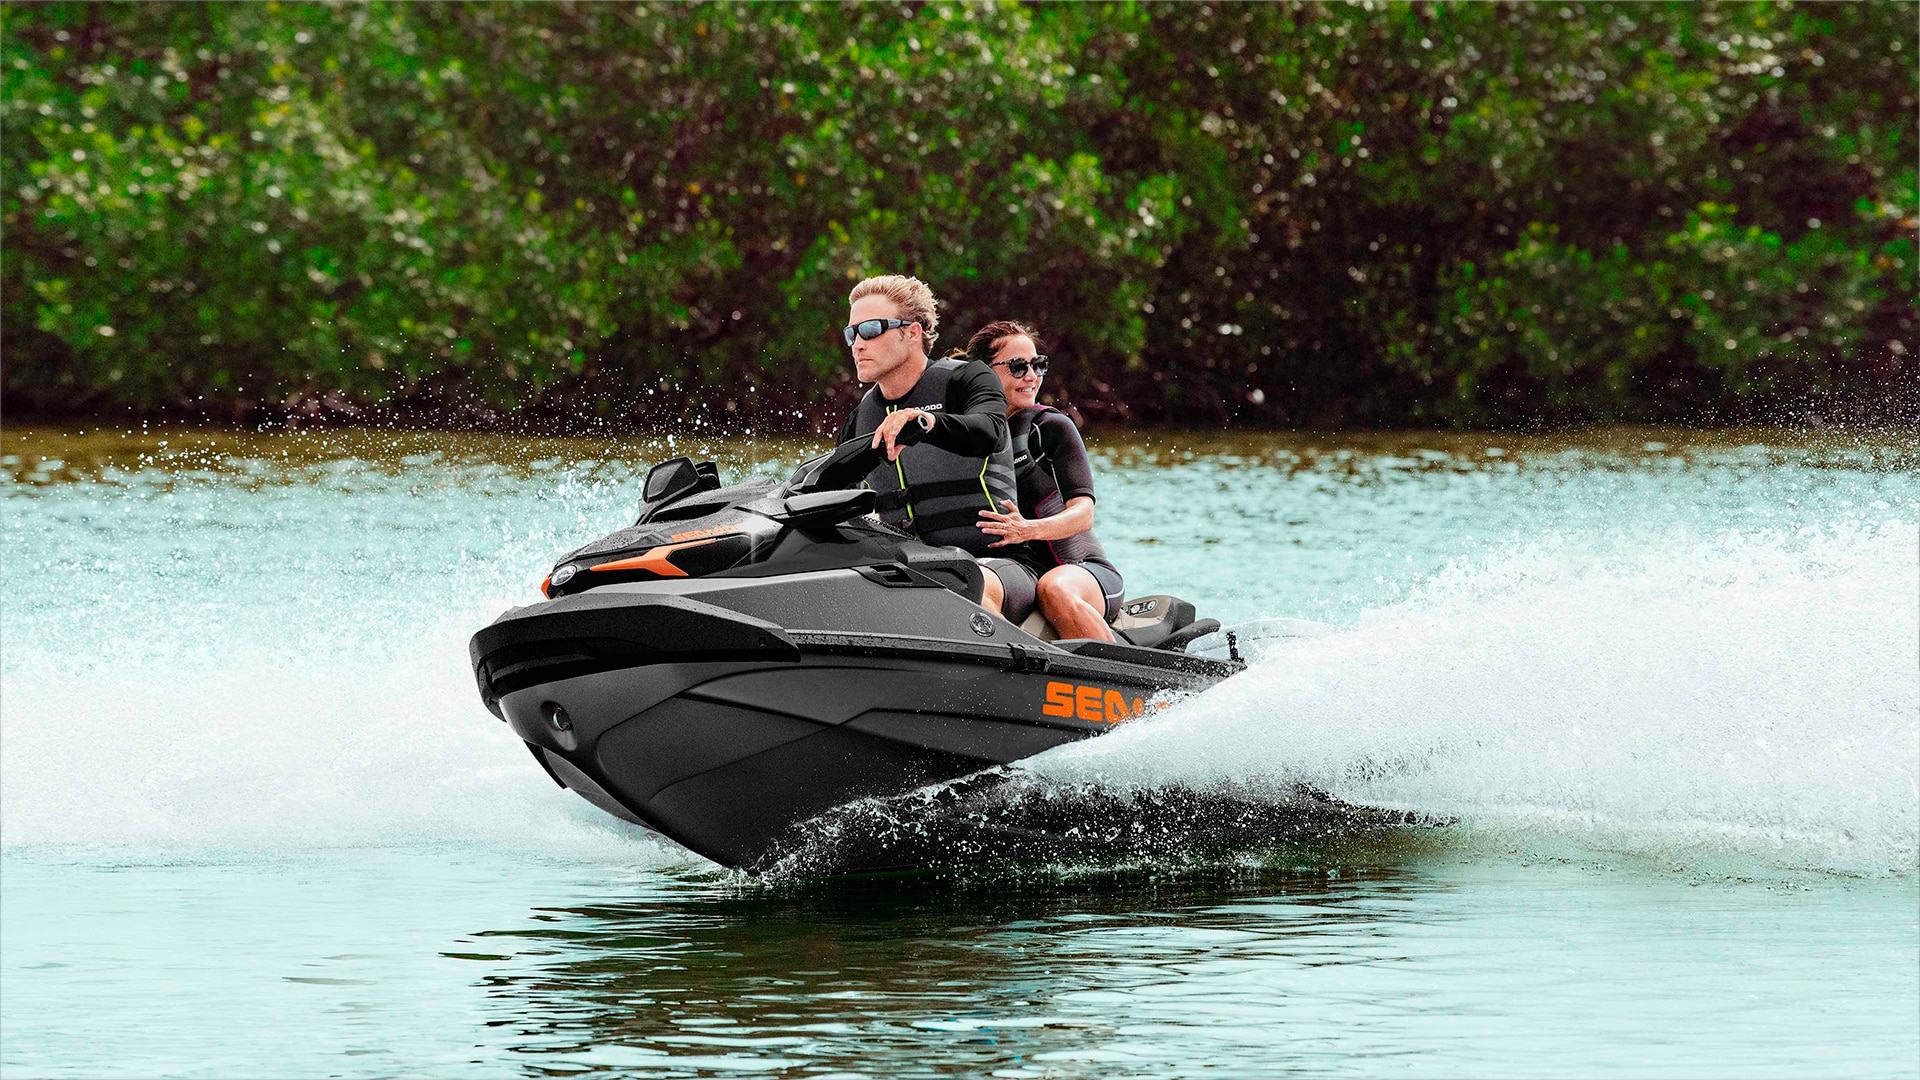 Dad and his daughter riding a Sea-Doo GTX personal watercraft